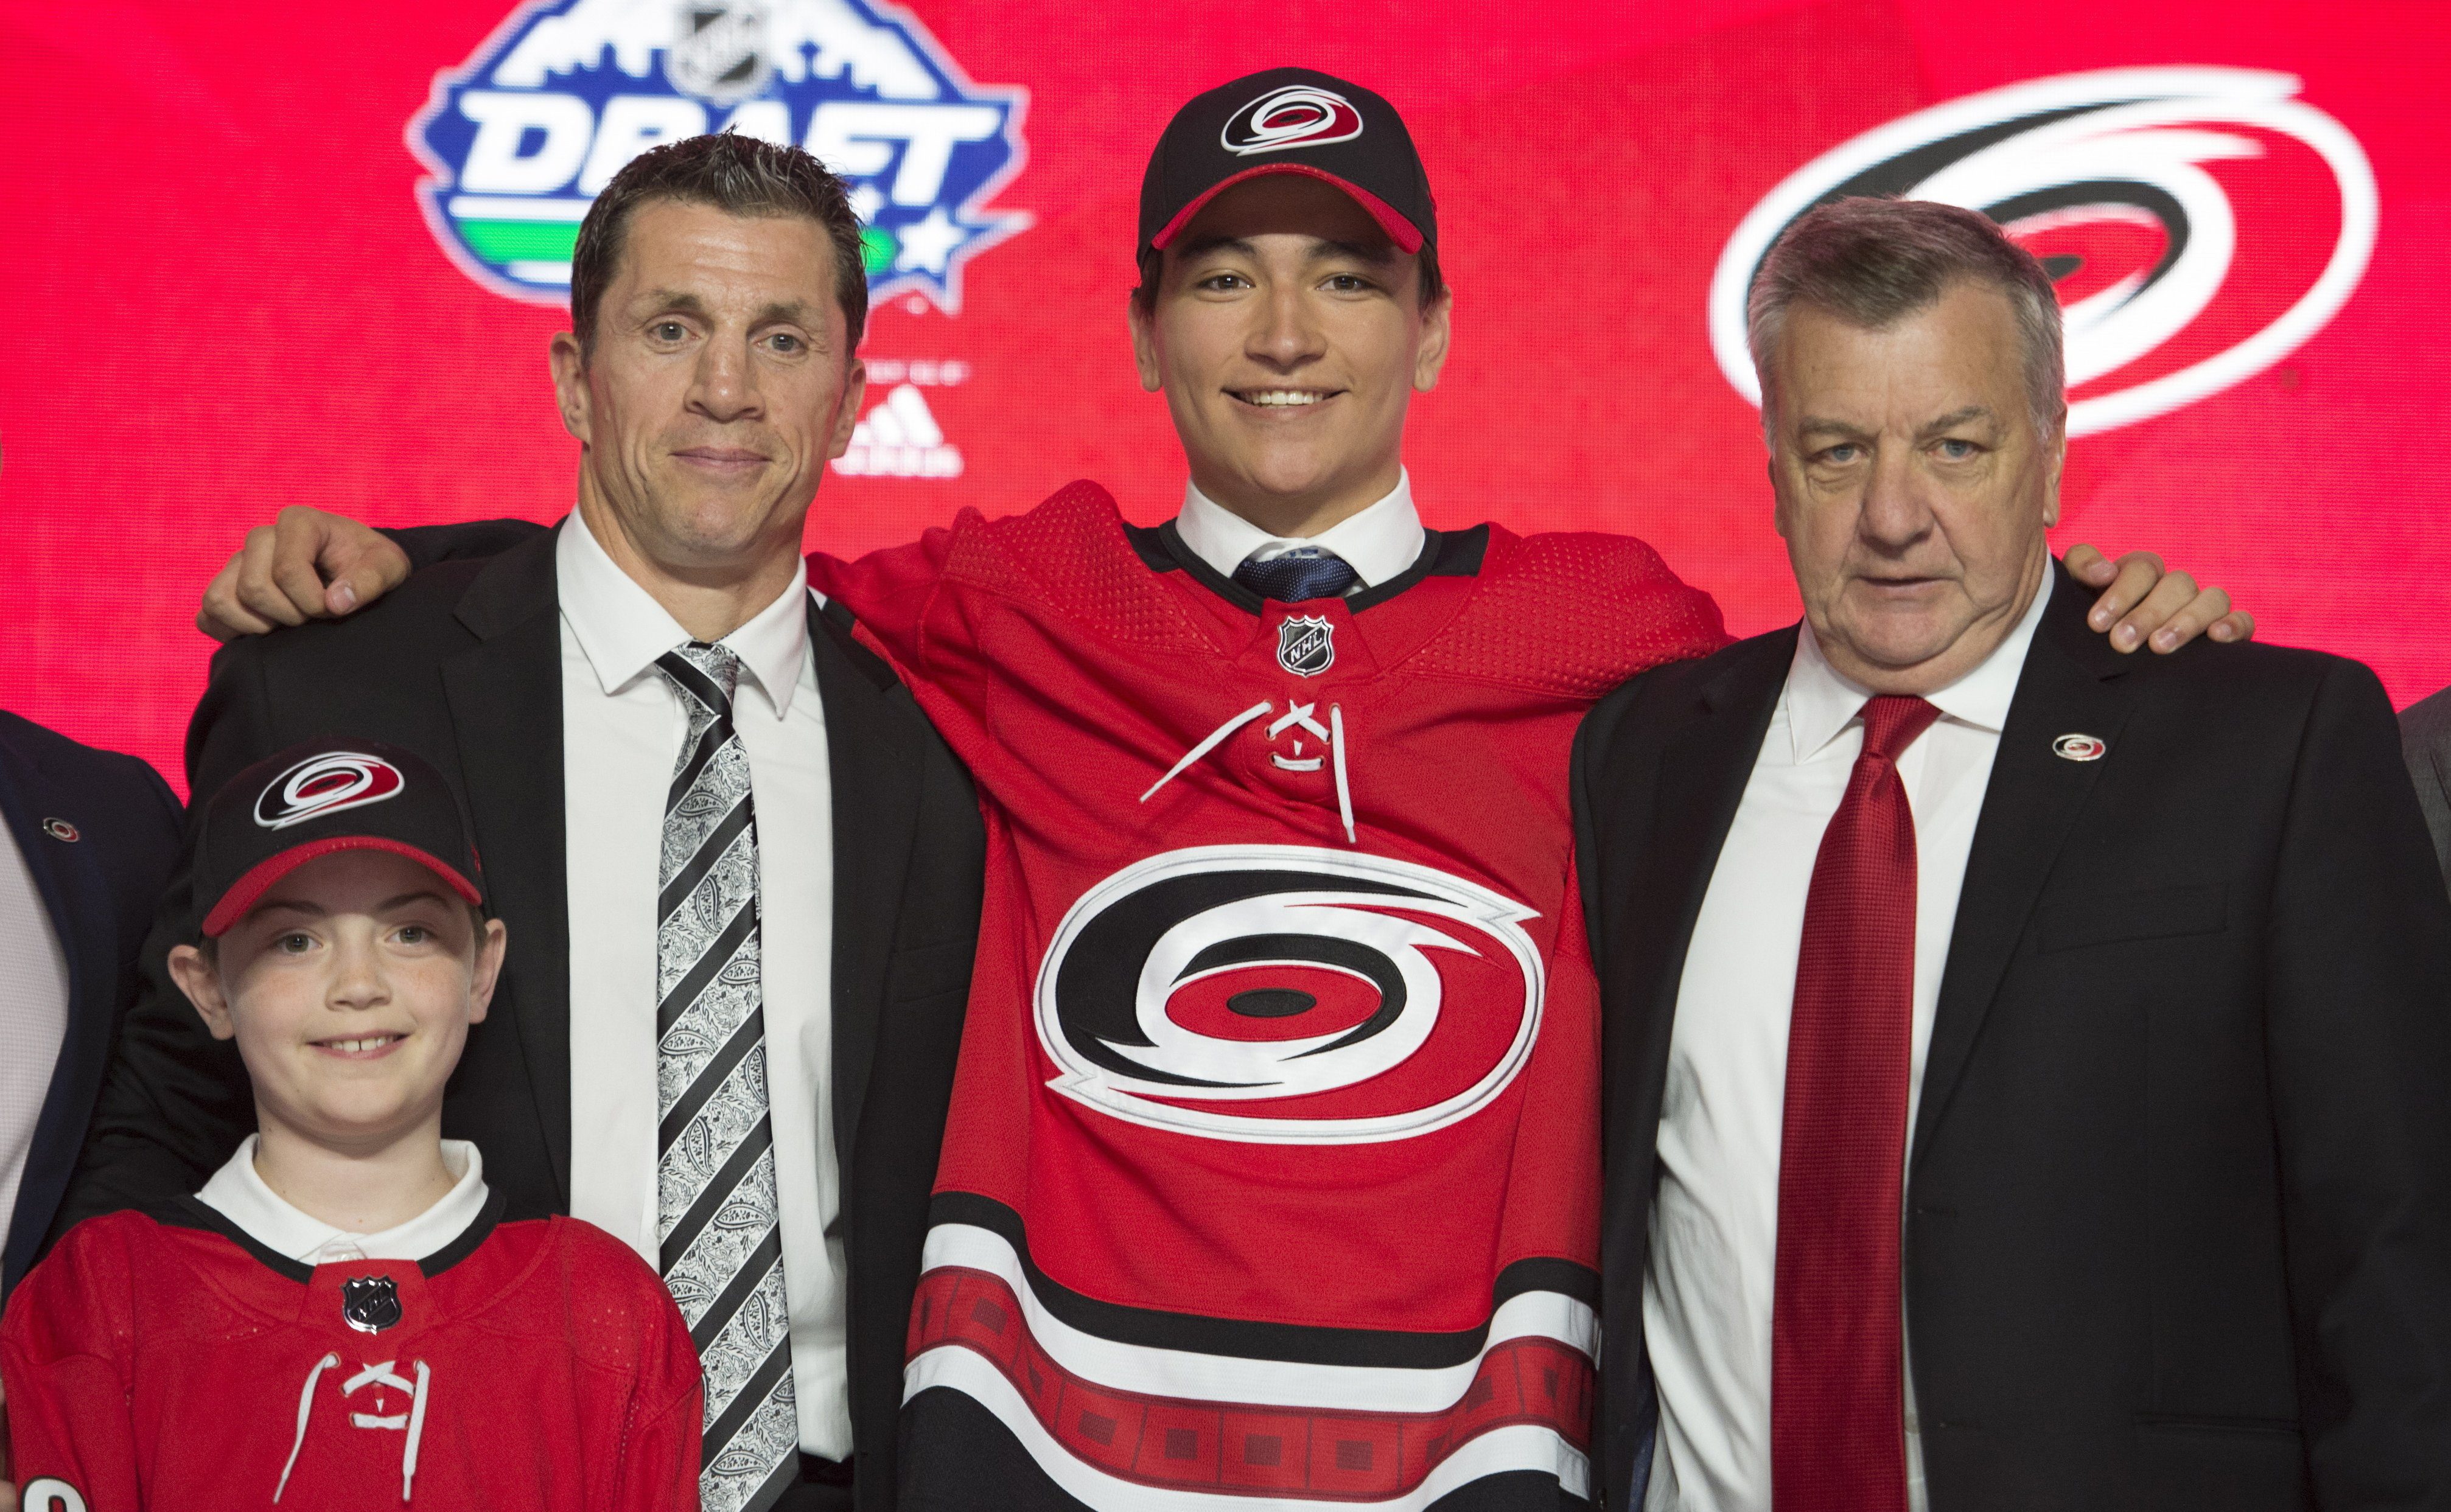 Hurricanes stock up at NHL Draft – The North State Journal